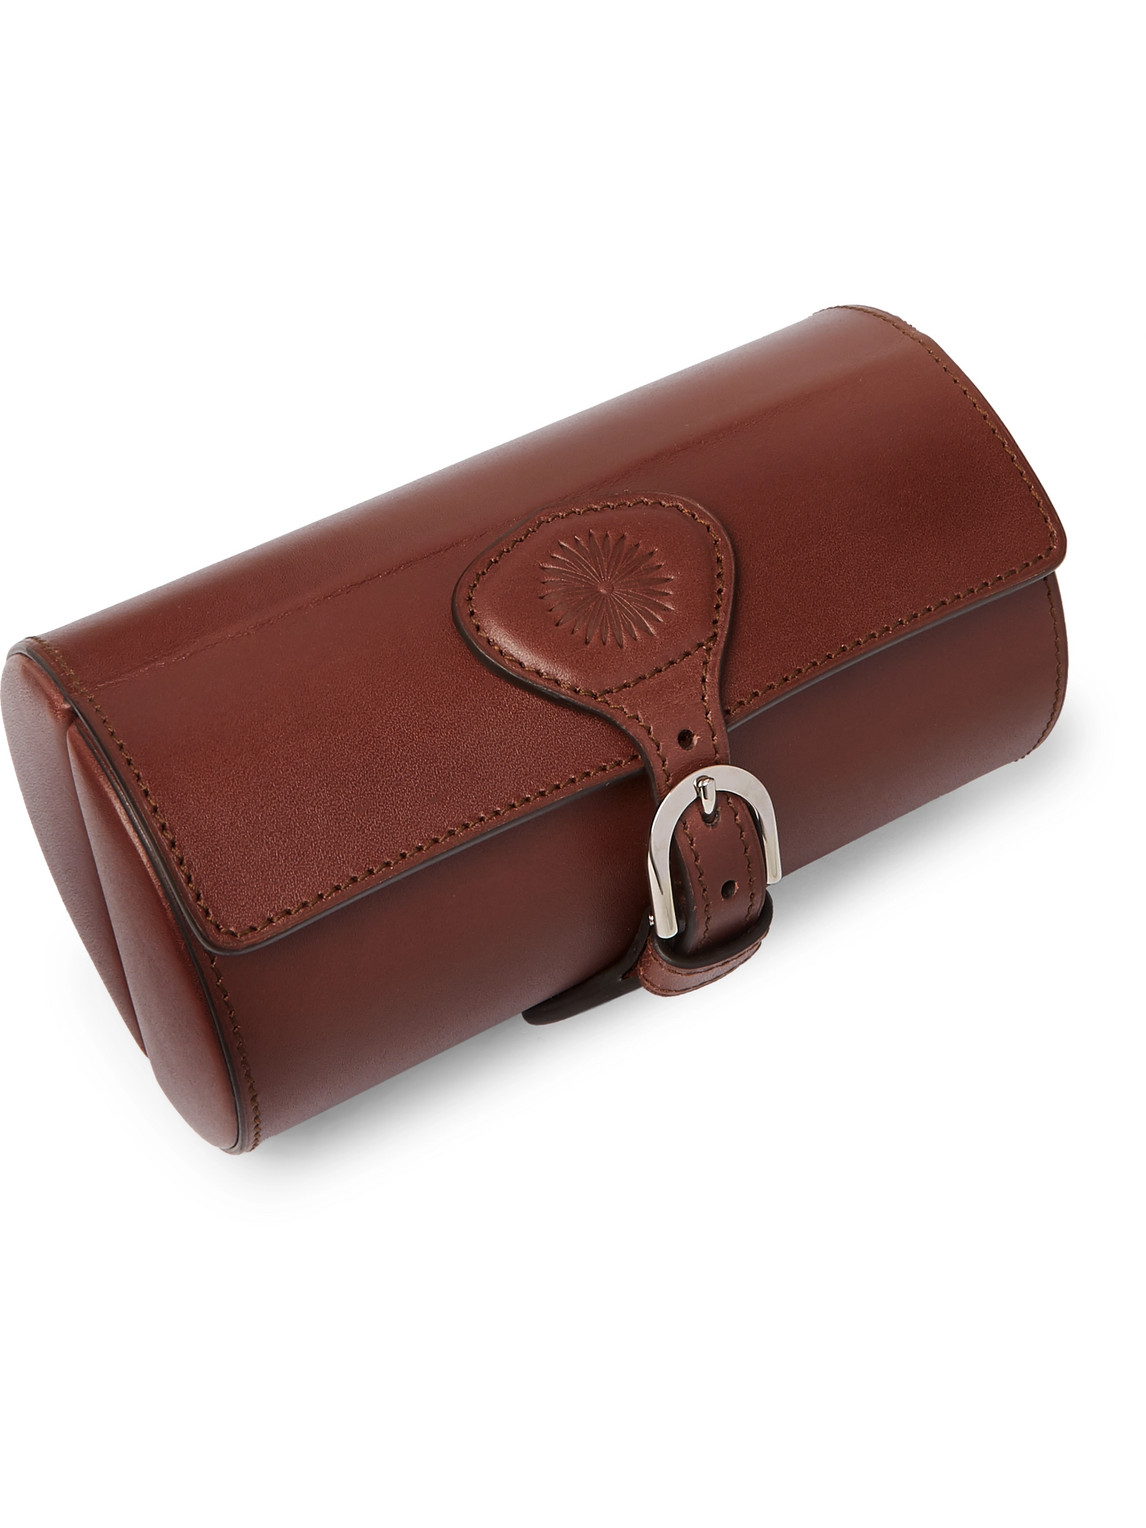 Purdey Travel Leather Double Watch Roll In Brown